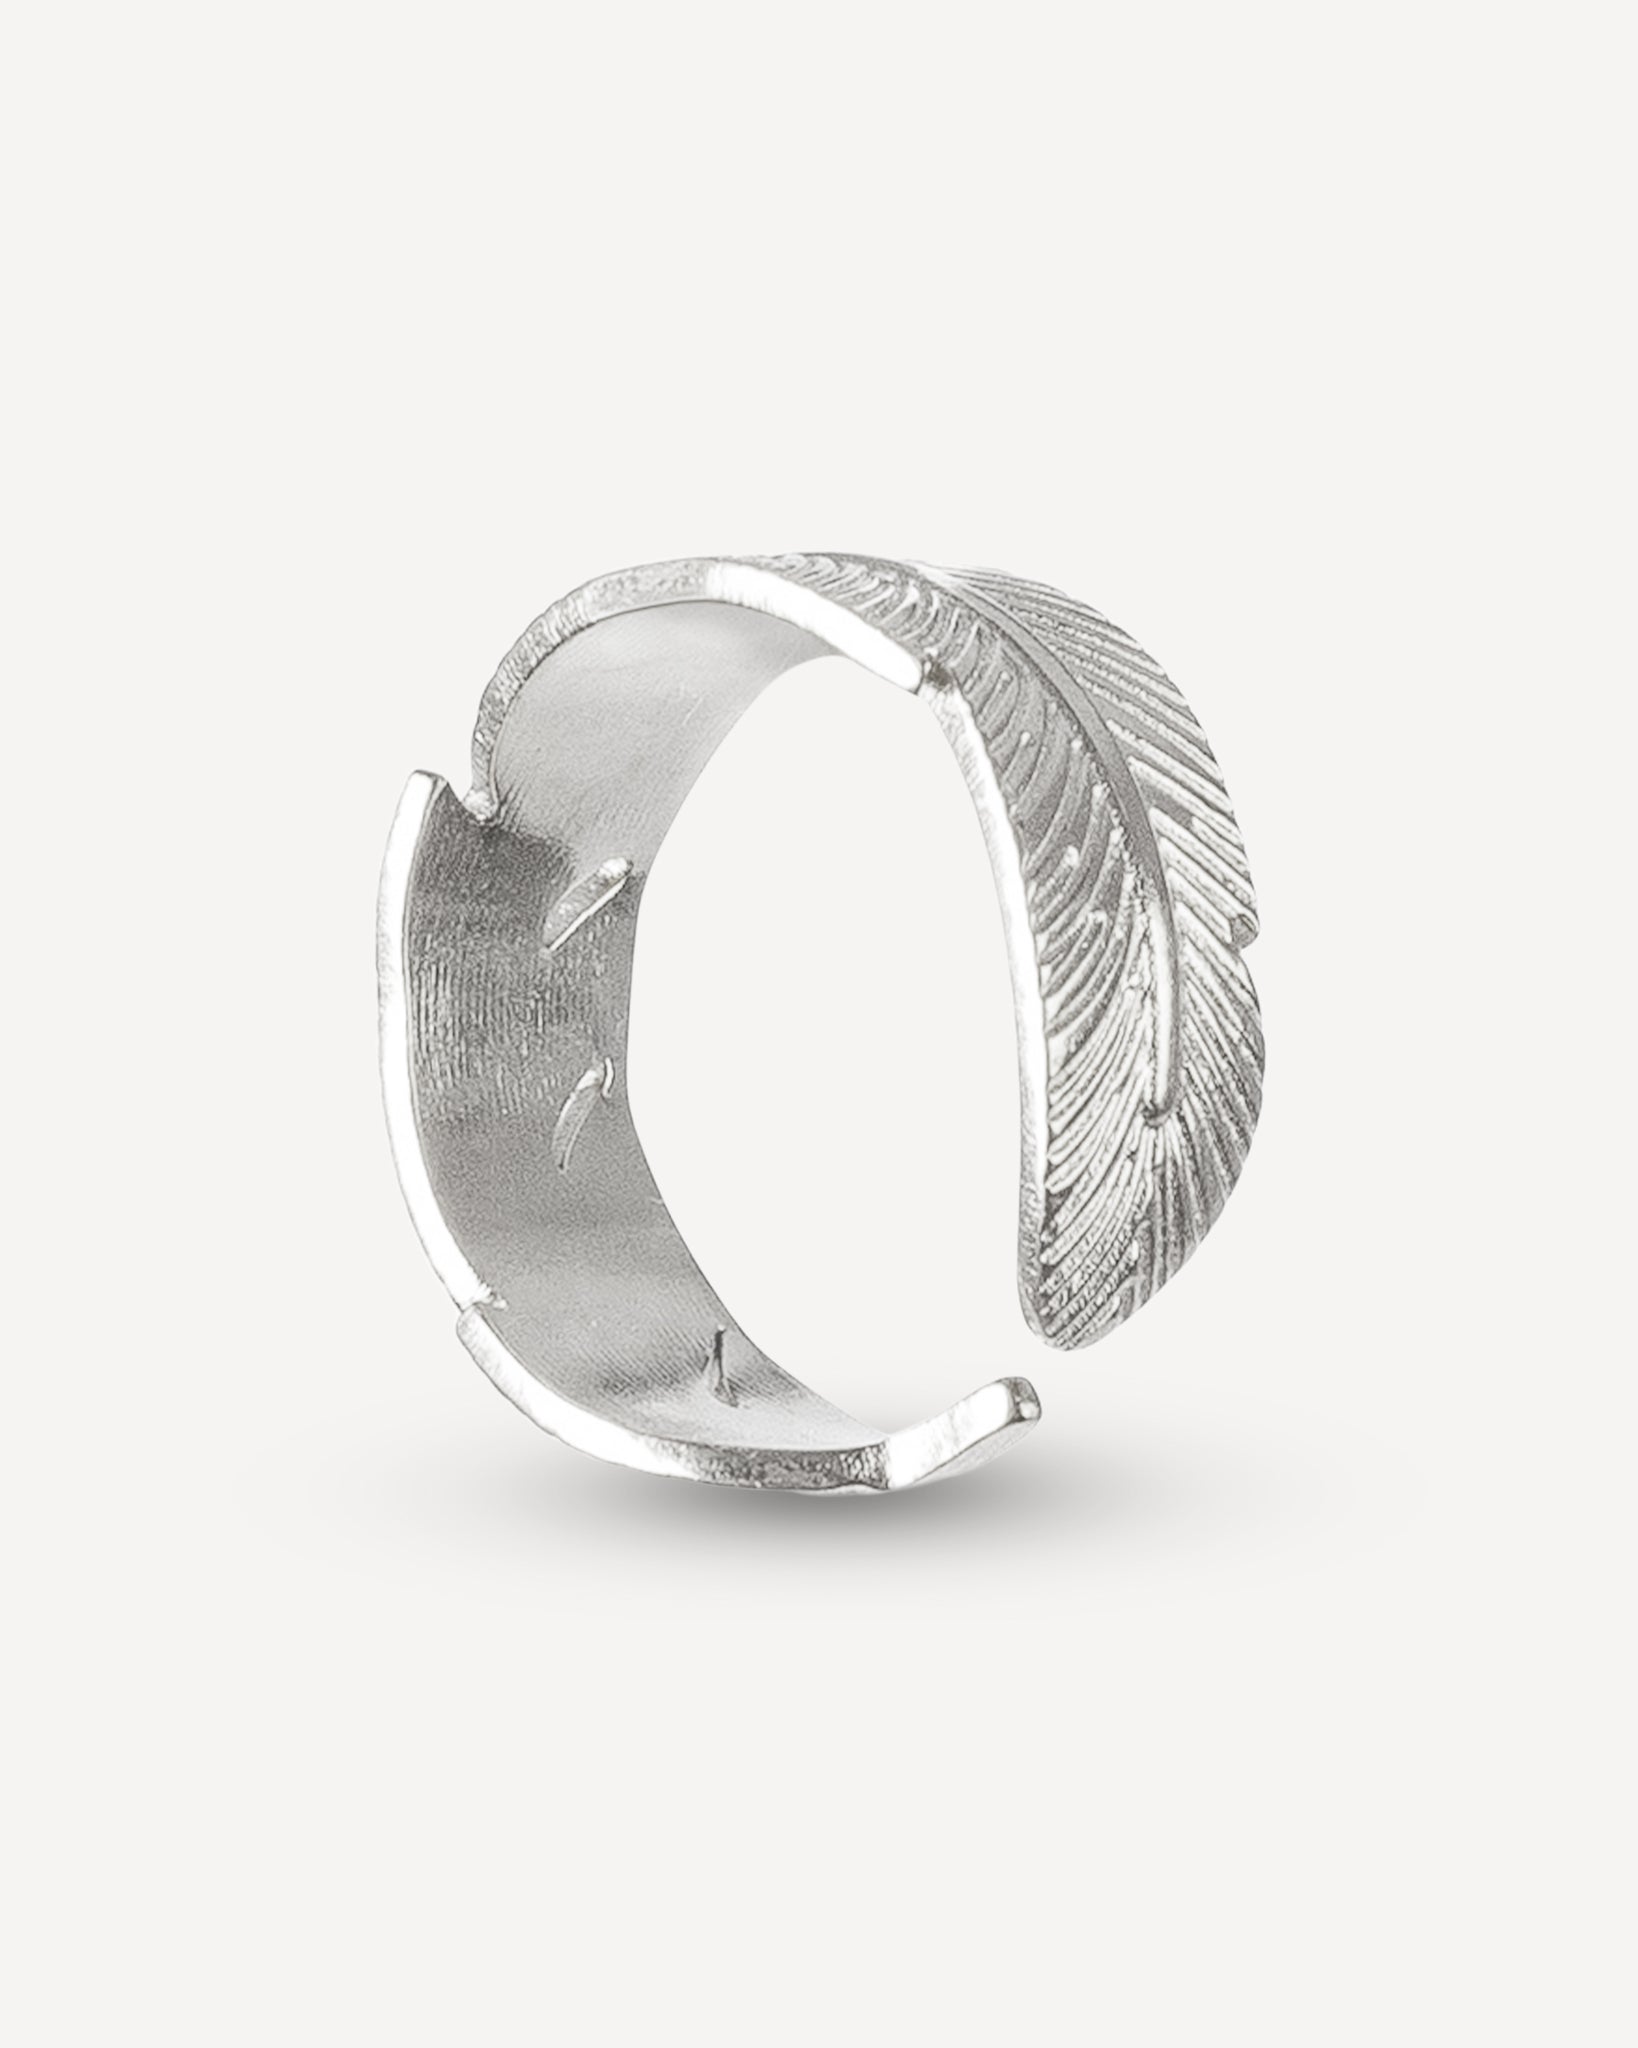 Free Spirit Feather Silver Ring